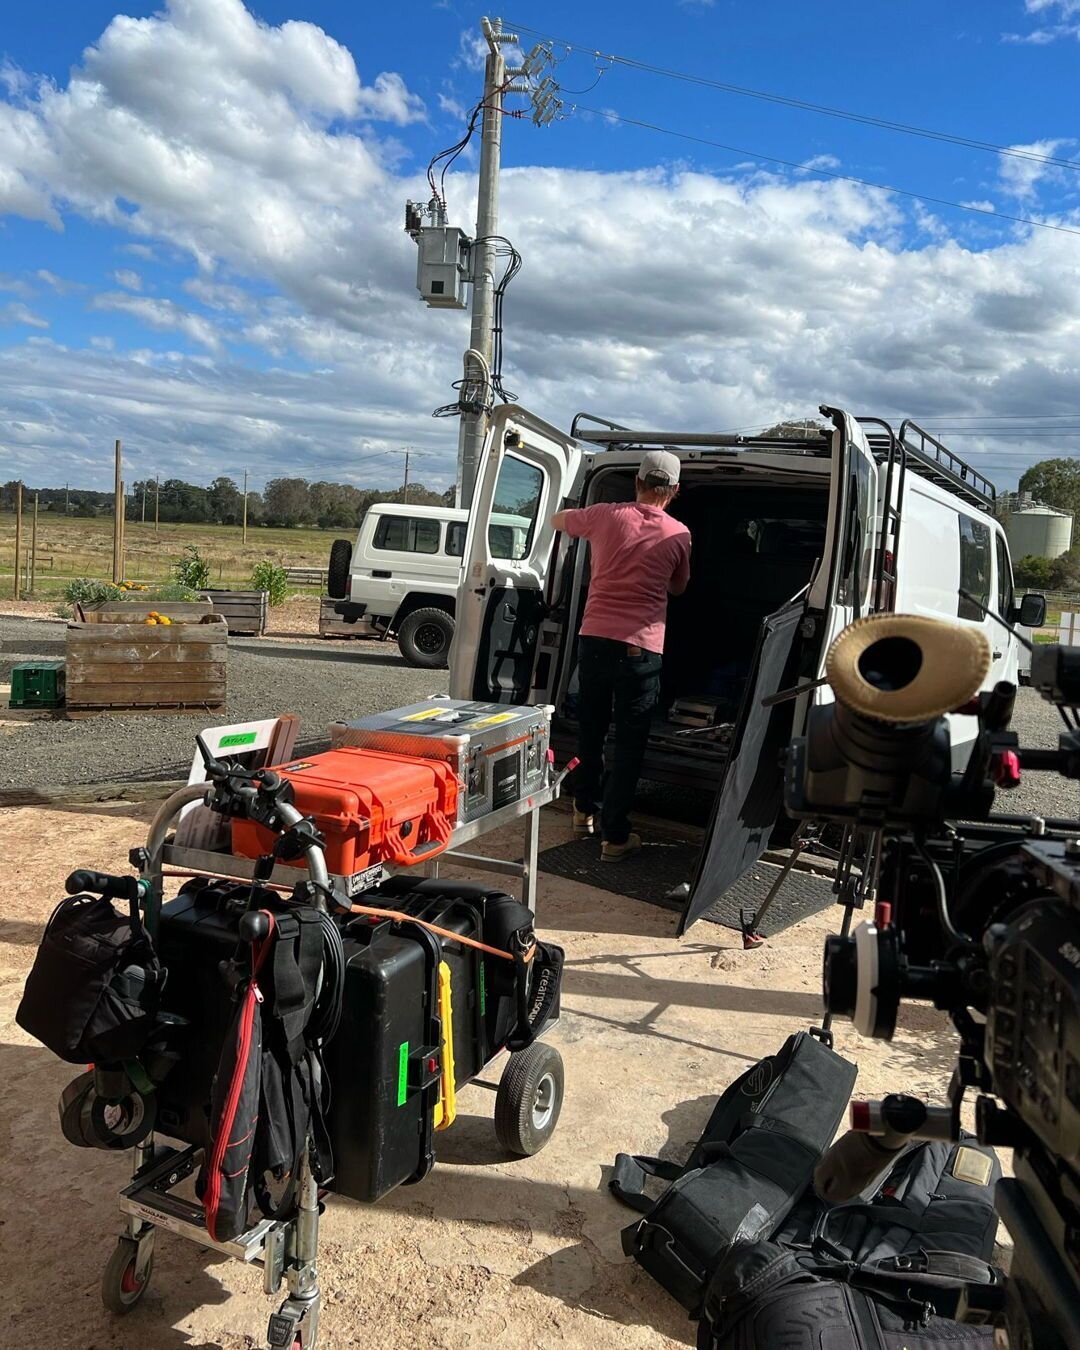 Behind the scenes shooting at Maffco Brewery and Taphouse for a fun regional Victoria story. Get out there and try a brew! They&rsquo;re great!!

* History story 🎬
* Community story 🎥
* Interviews 🕵️
* Drone shots 🦅
* Business case study 💼
* Tas